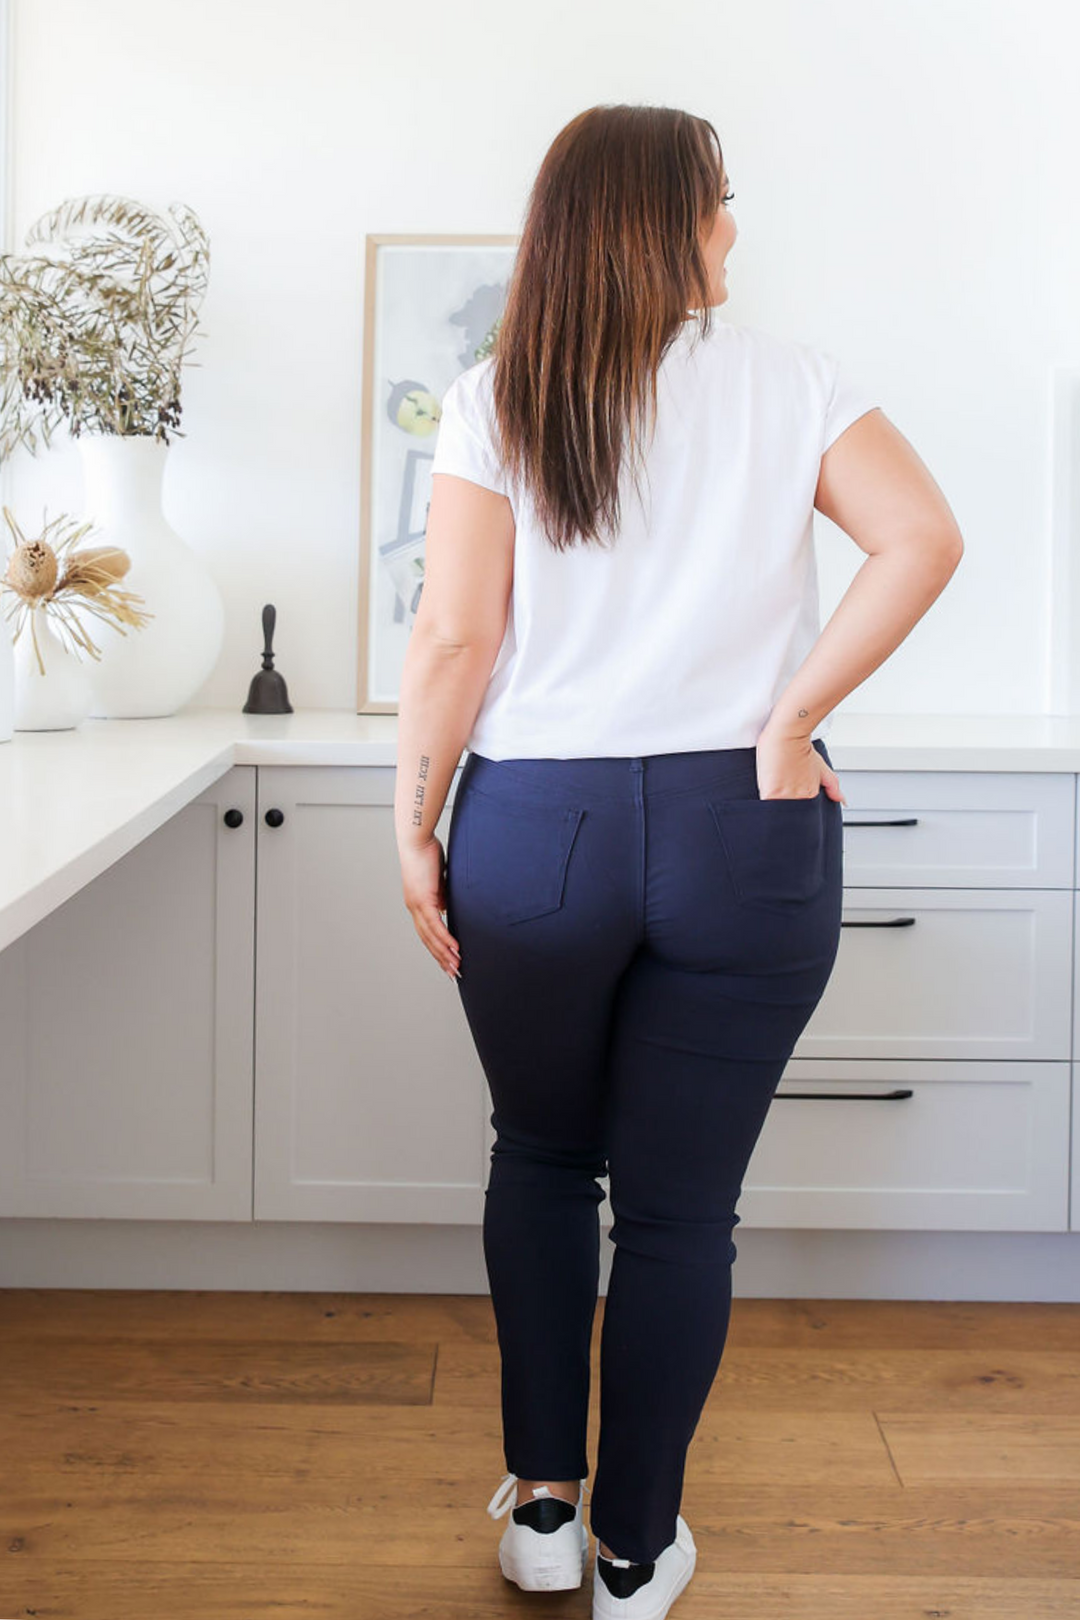 Ladies Jeans - Navy - Stretch Jeans - Functional Front + Back Pockets - Plus Size Jeans - Sizes 6 - 26 - Delta Jeans Navy Back Full Length View Showing Pockets - Daisy's Closet